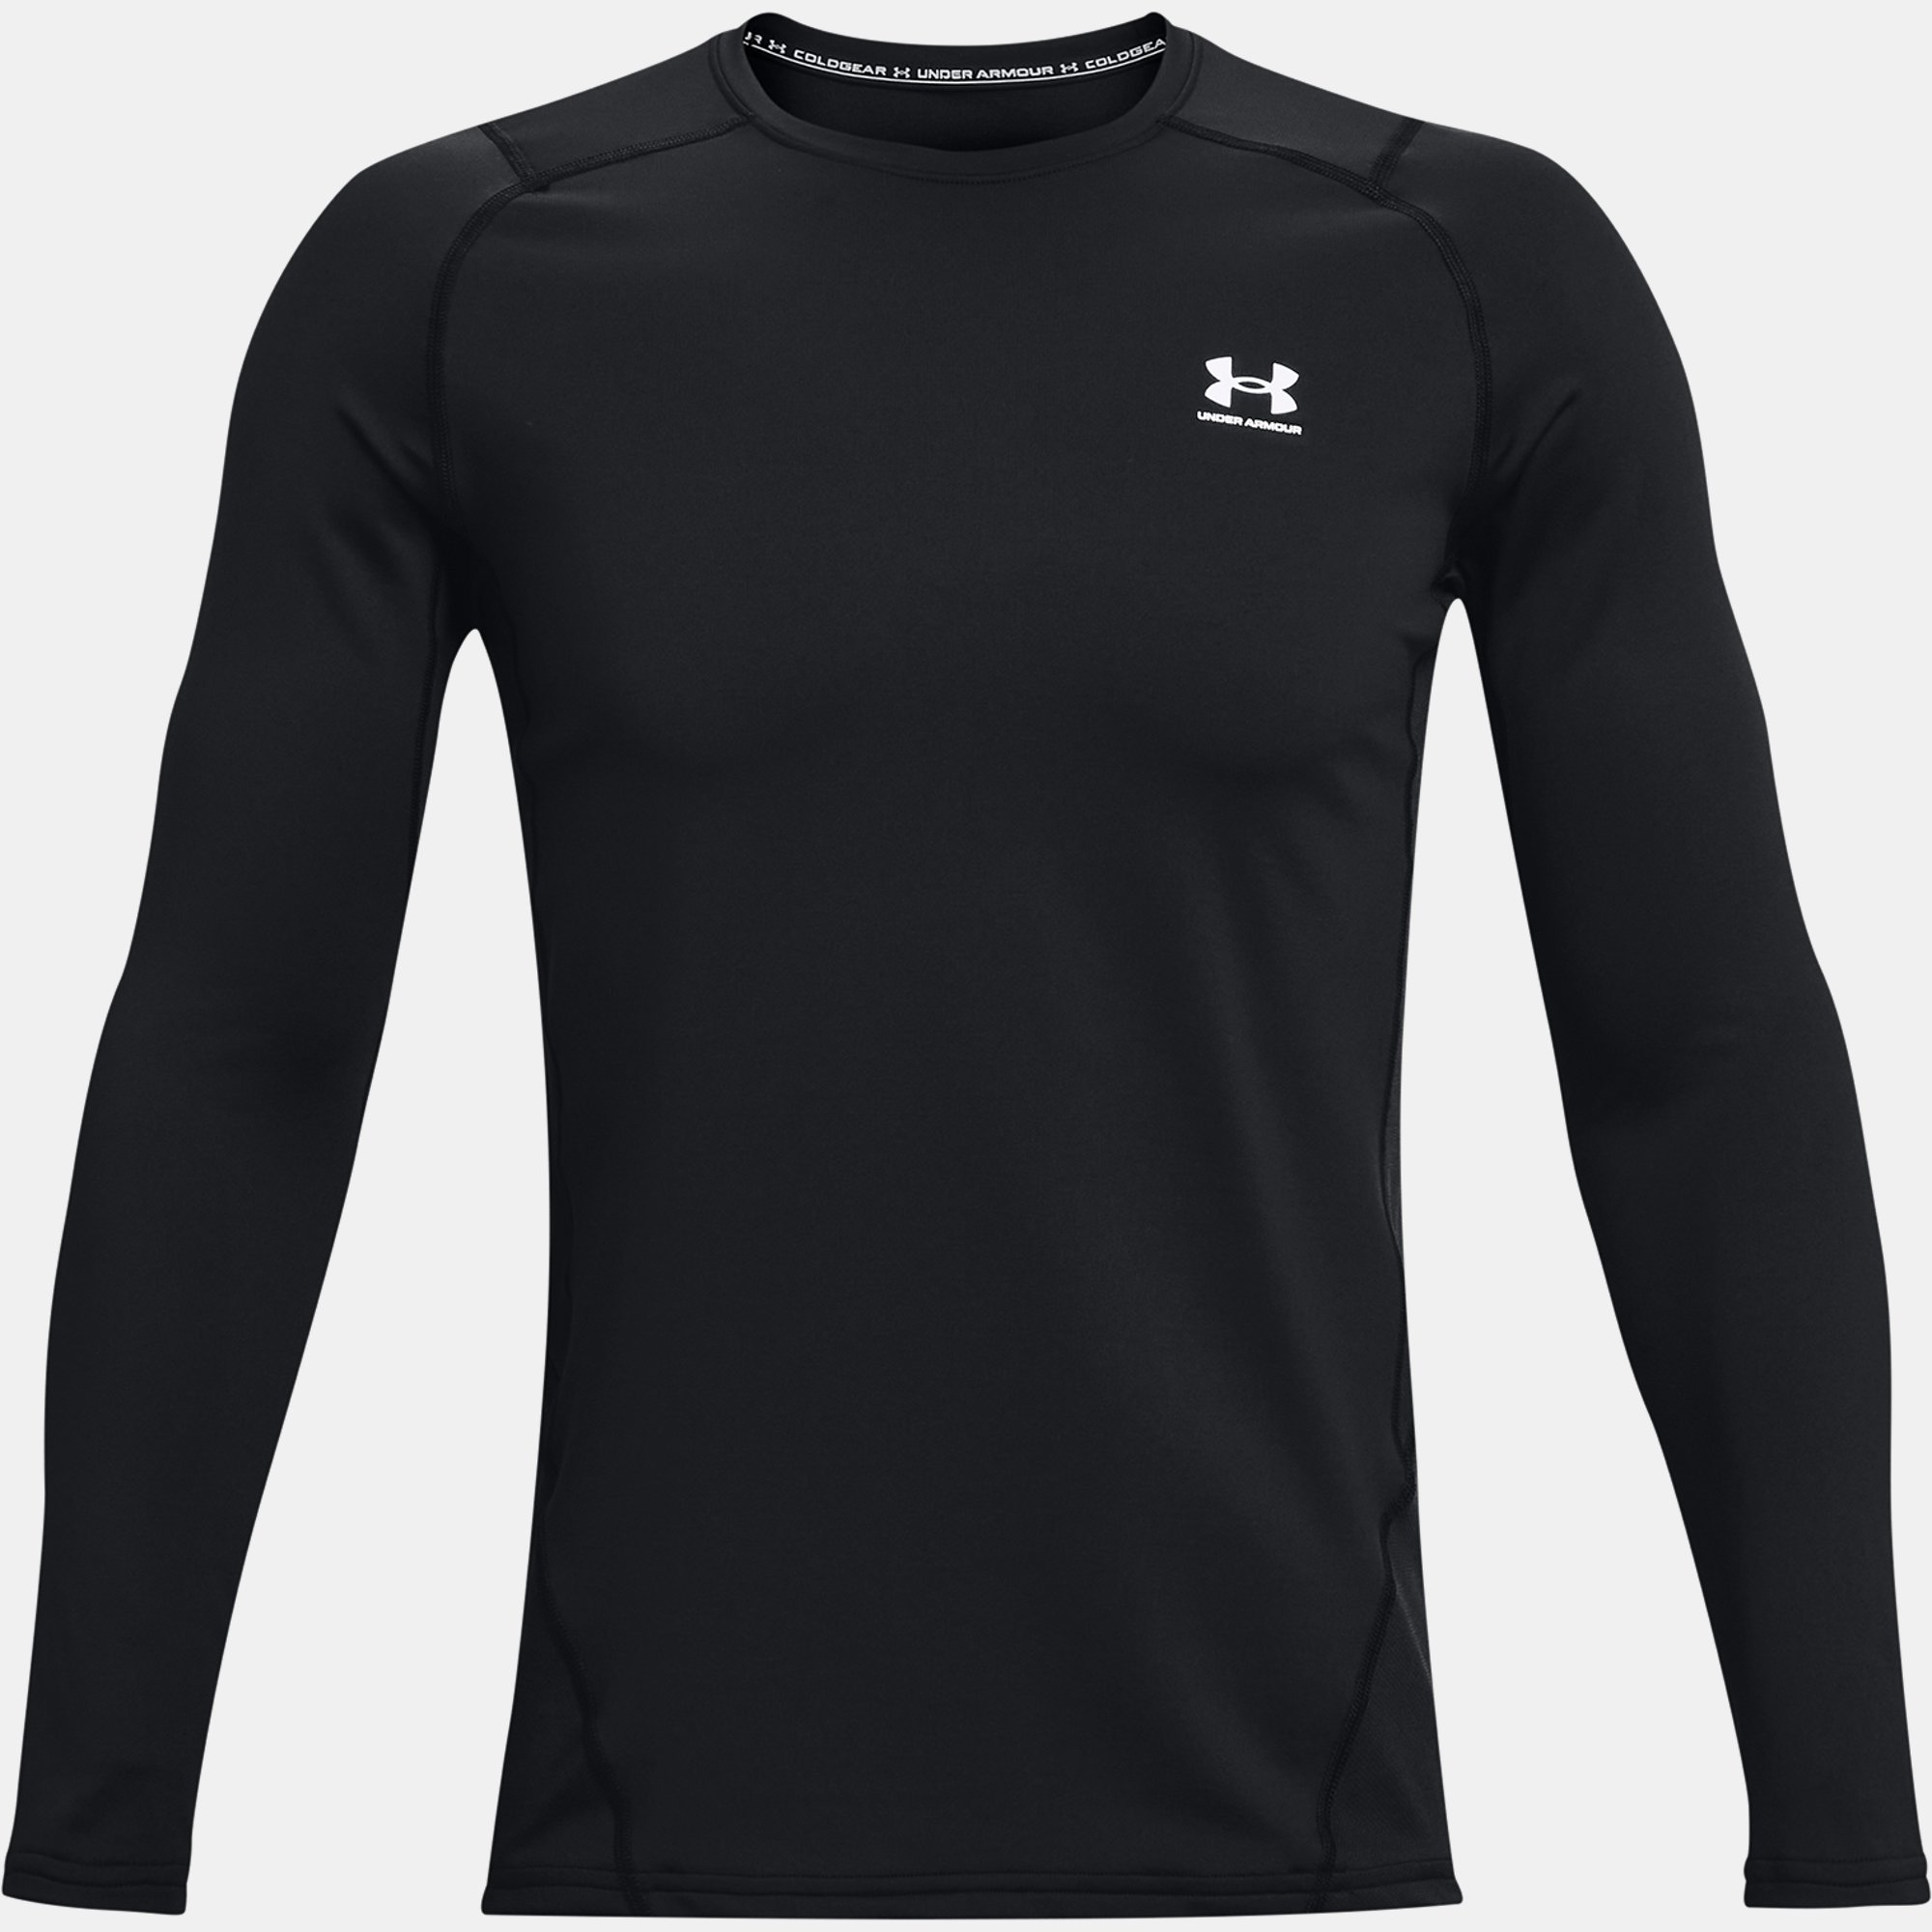 Under Armour ColdGear Fitted Crew Top - Black